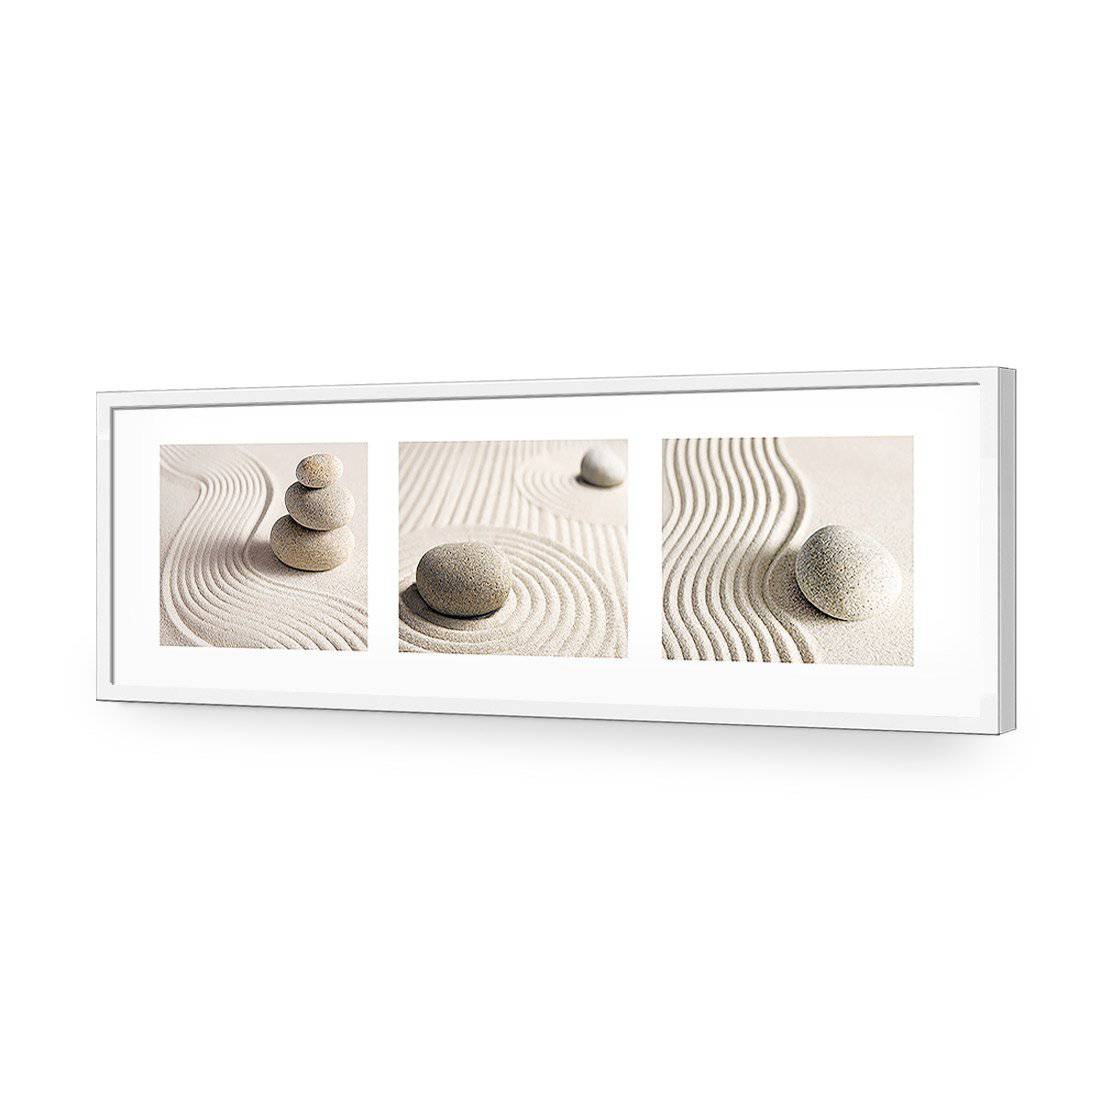 Sand Stone Montage, Long-Acrylic-Wall Art Design-Without Border-Acrylic - White Frame-60x20cm-Wall Art Designs